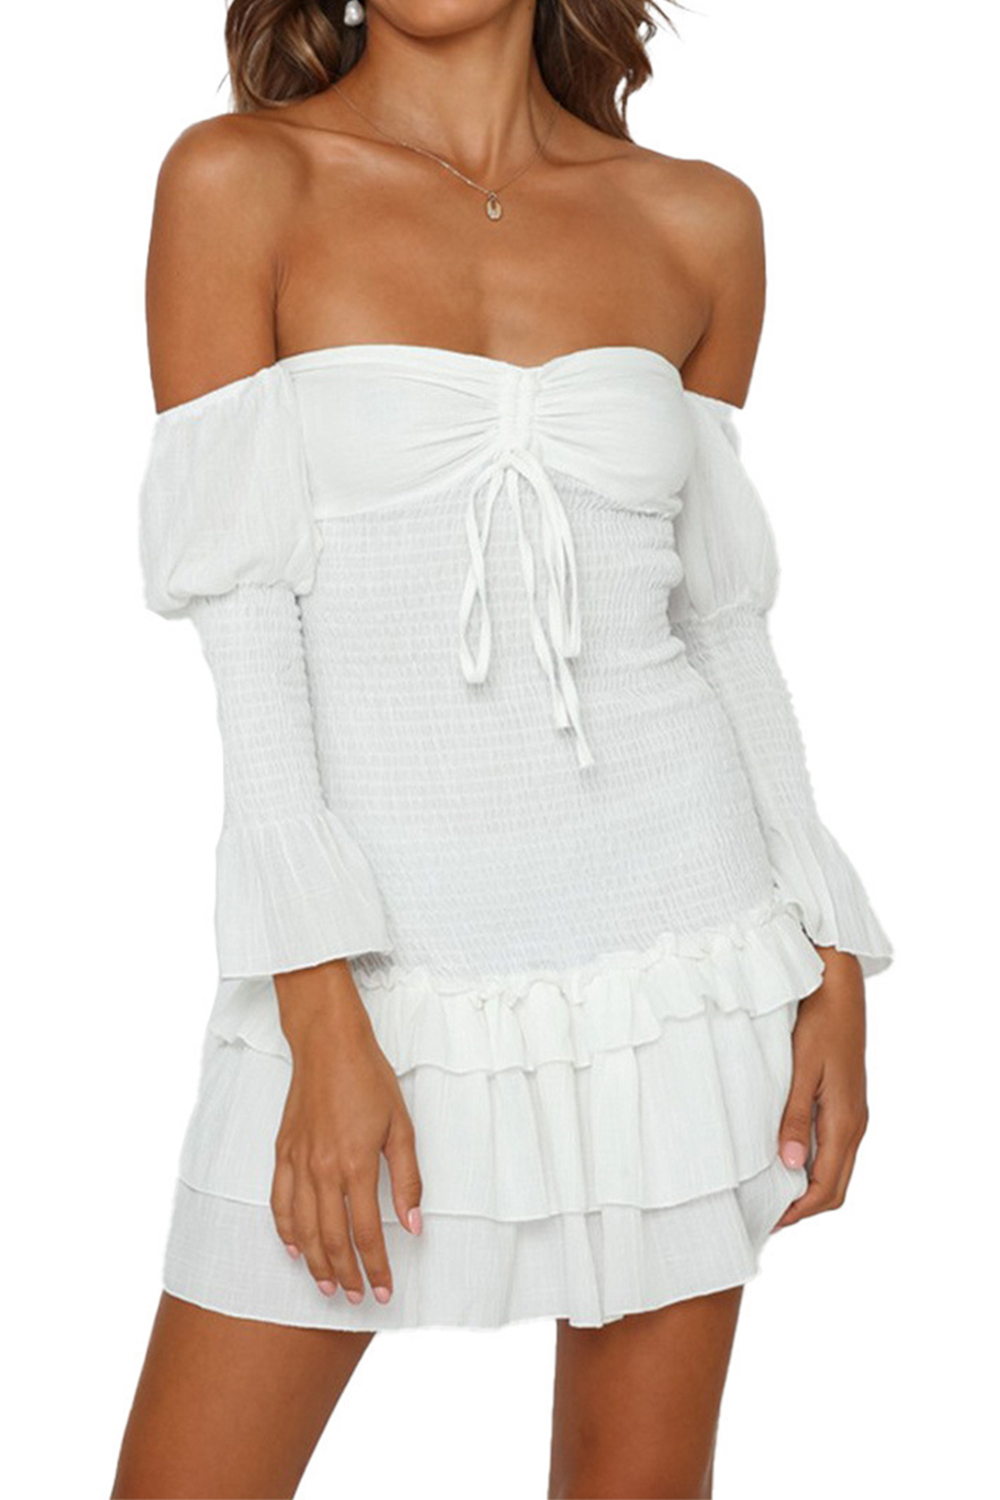 Bodycon Pleated Off The Shoulder Long Sleeves Little White Dresss